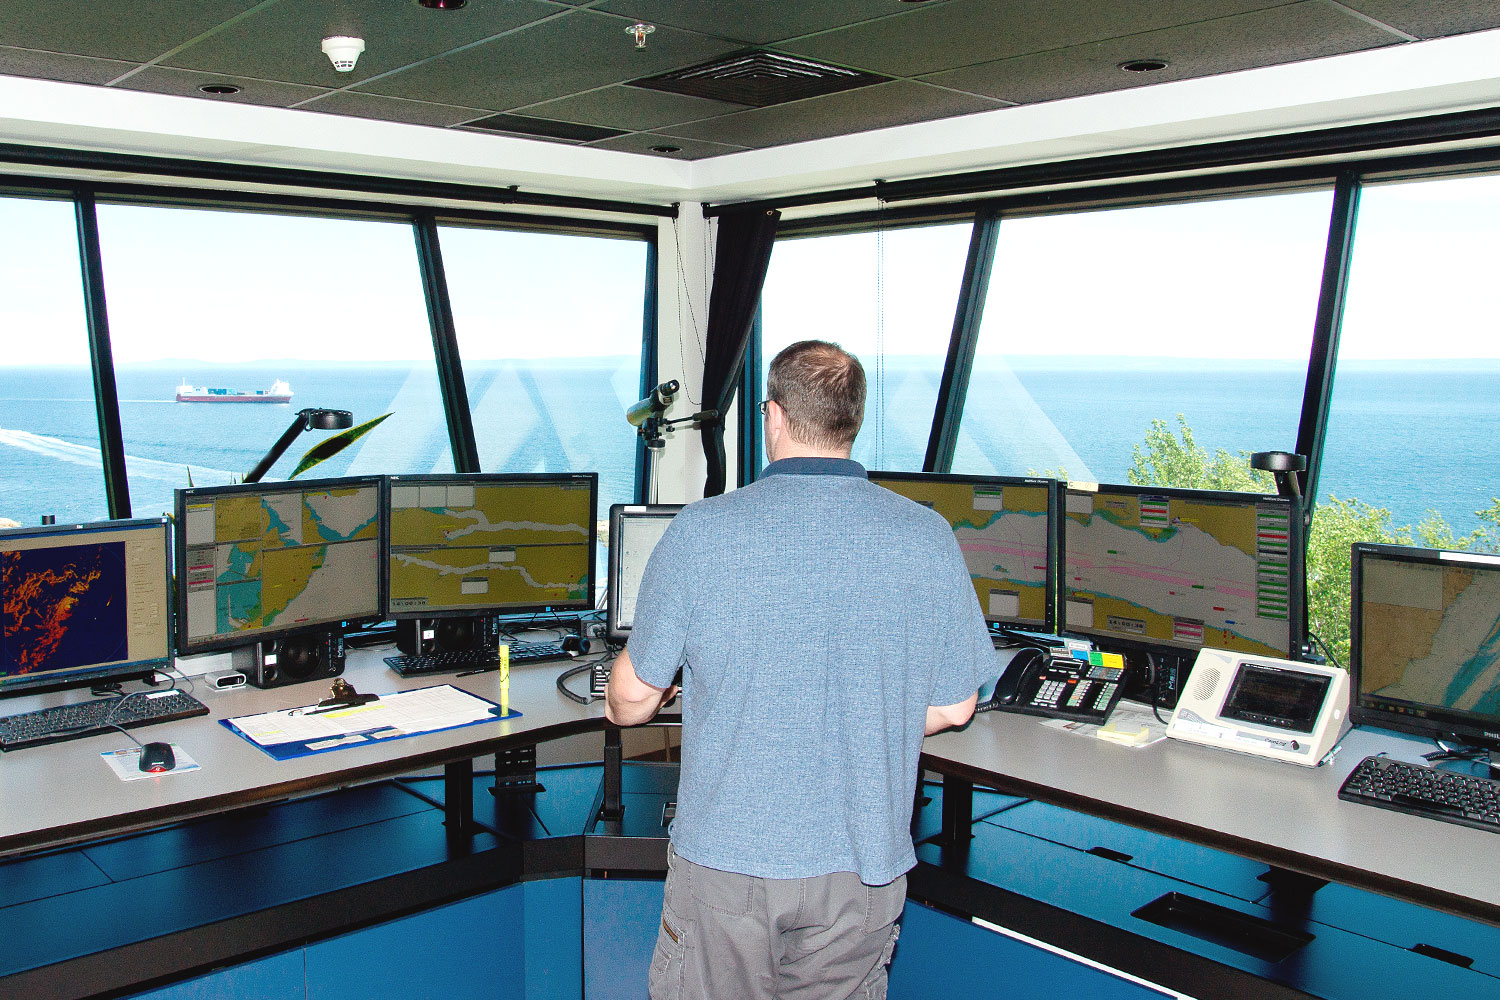 Photo of a man in front of several computer screens and watching a vessel through the window